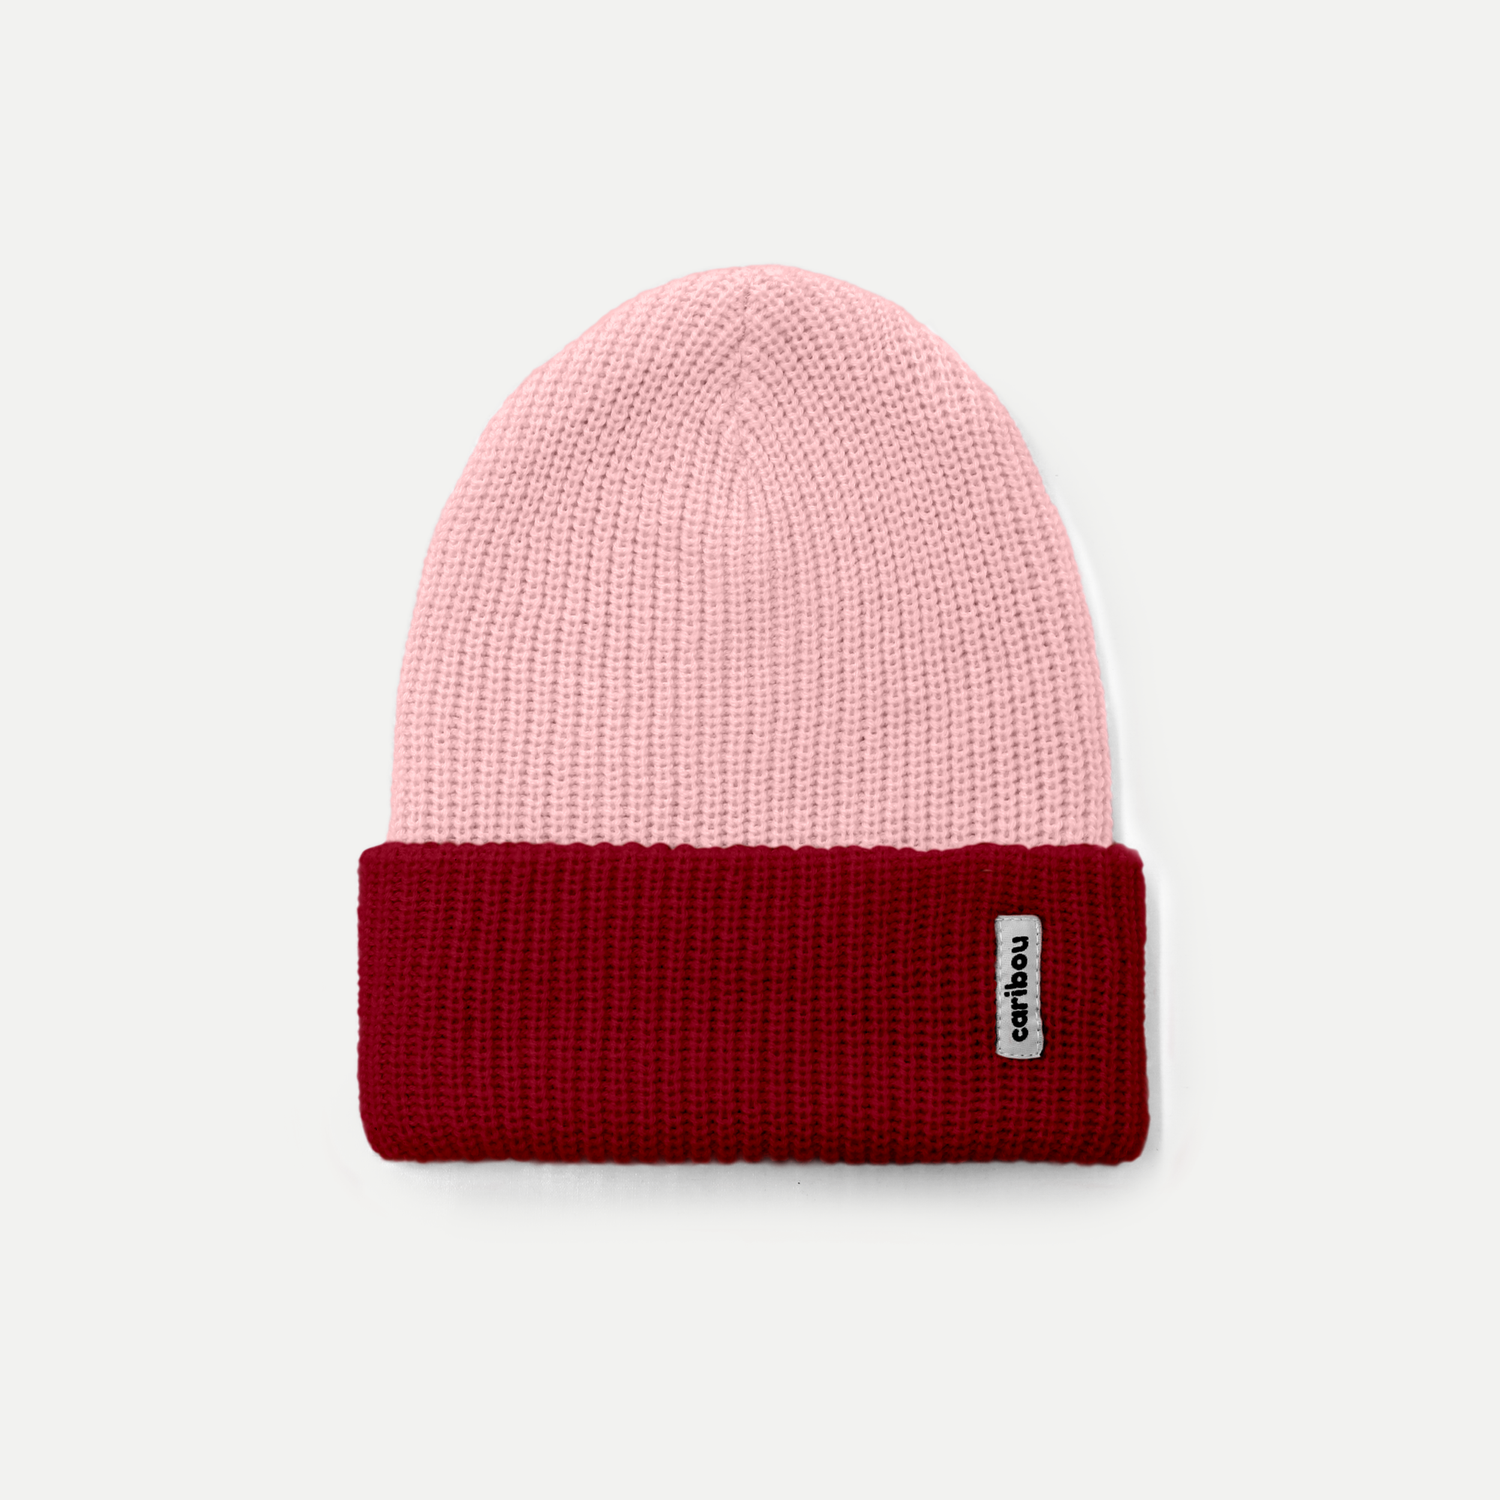 Tuque - Roselin